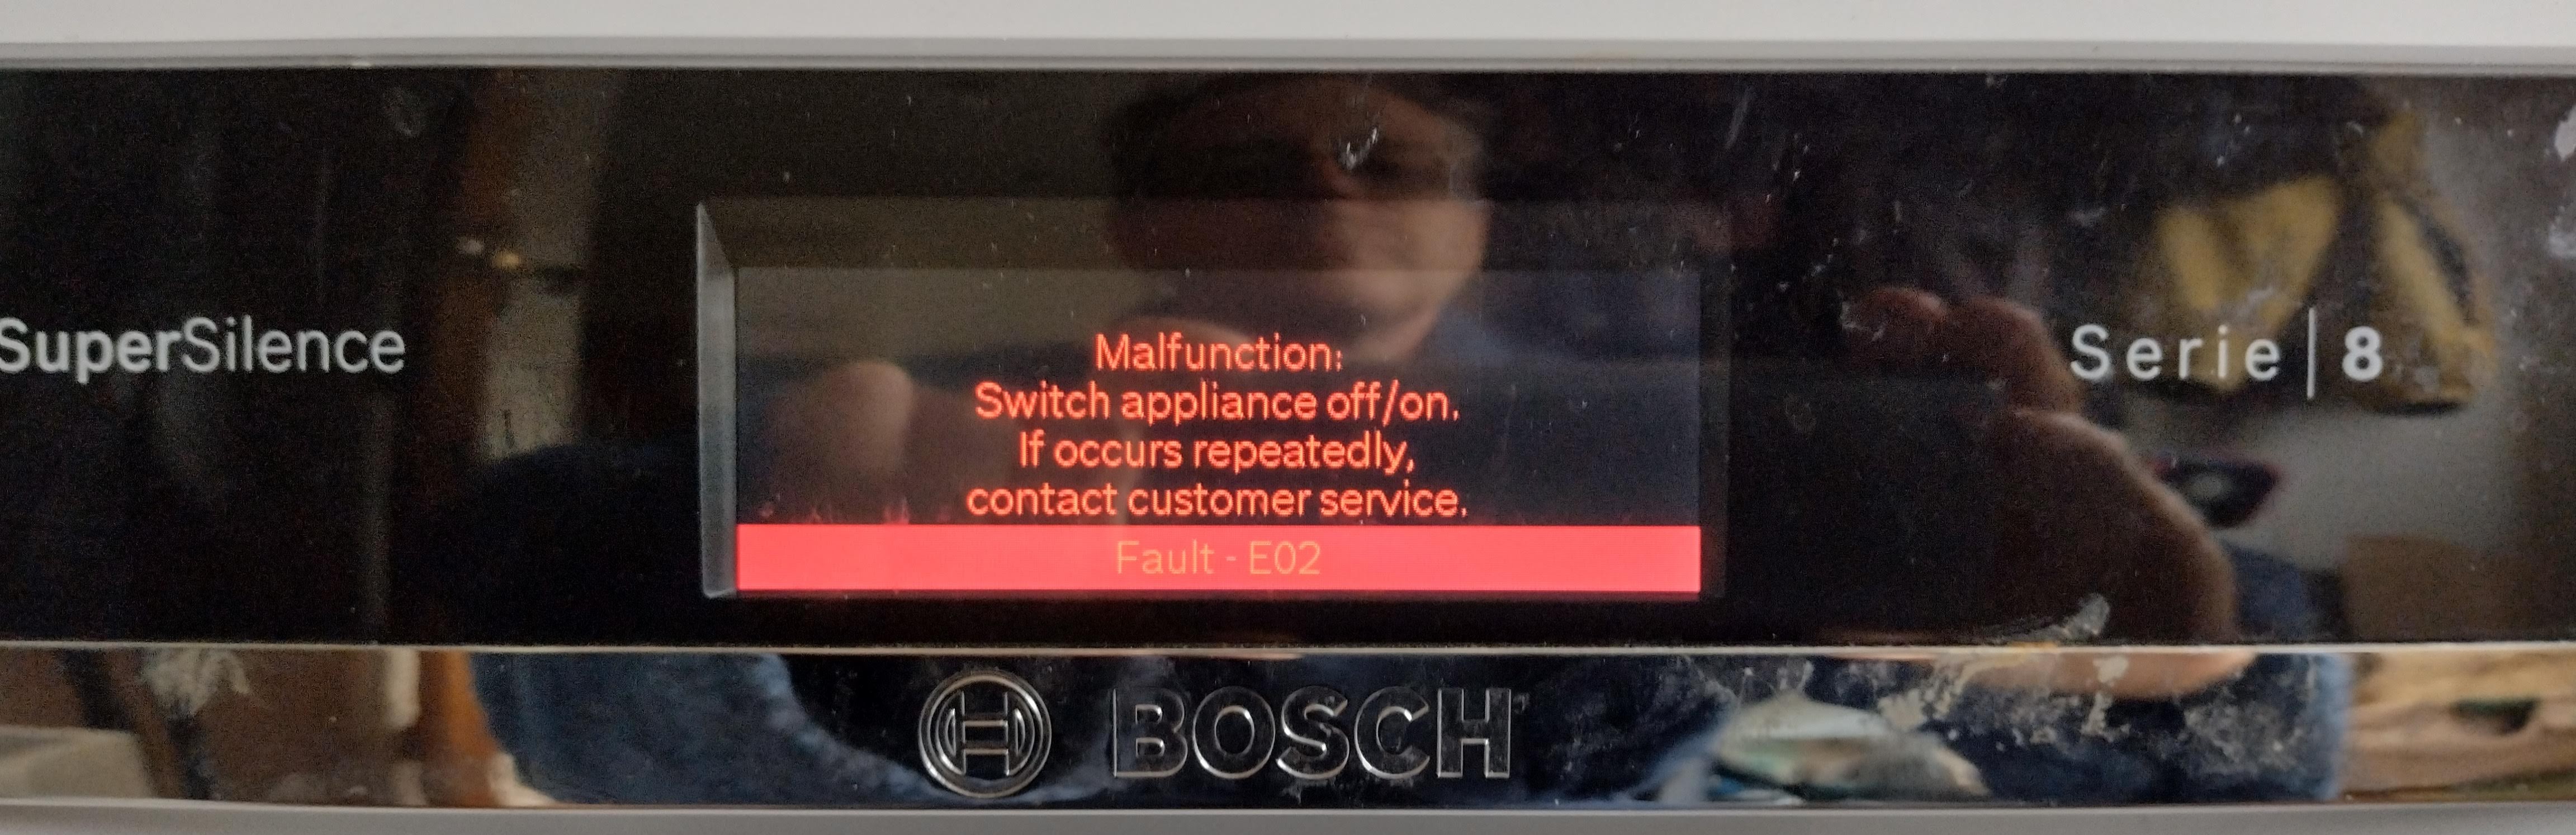 Why Is My Bosch Dishwasher Not Drying Dishes? - Best Service Company